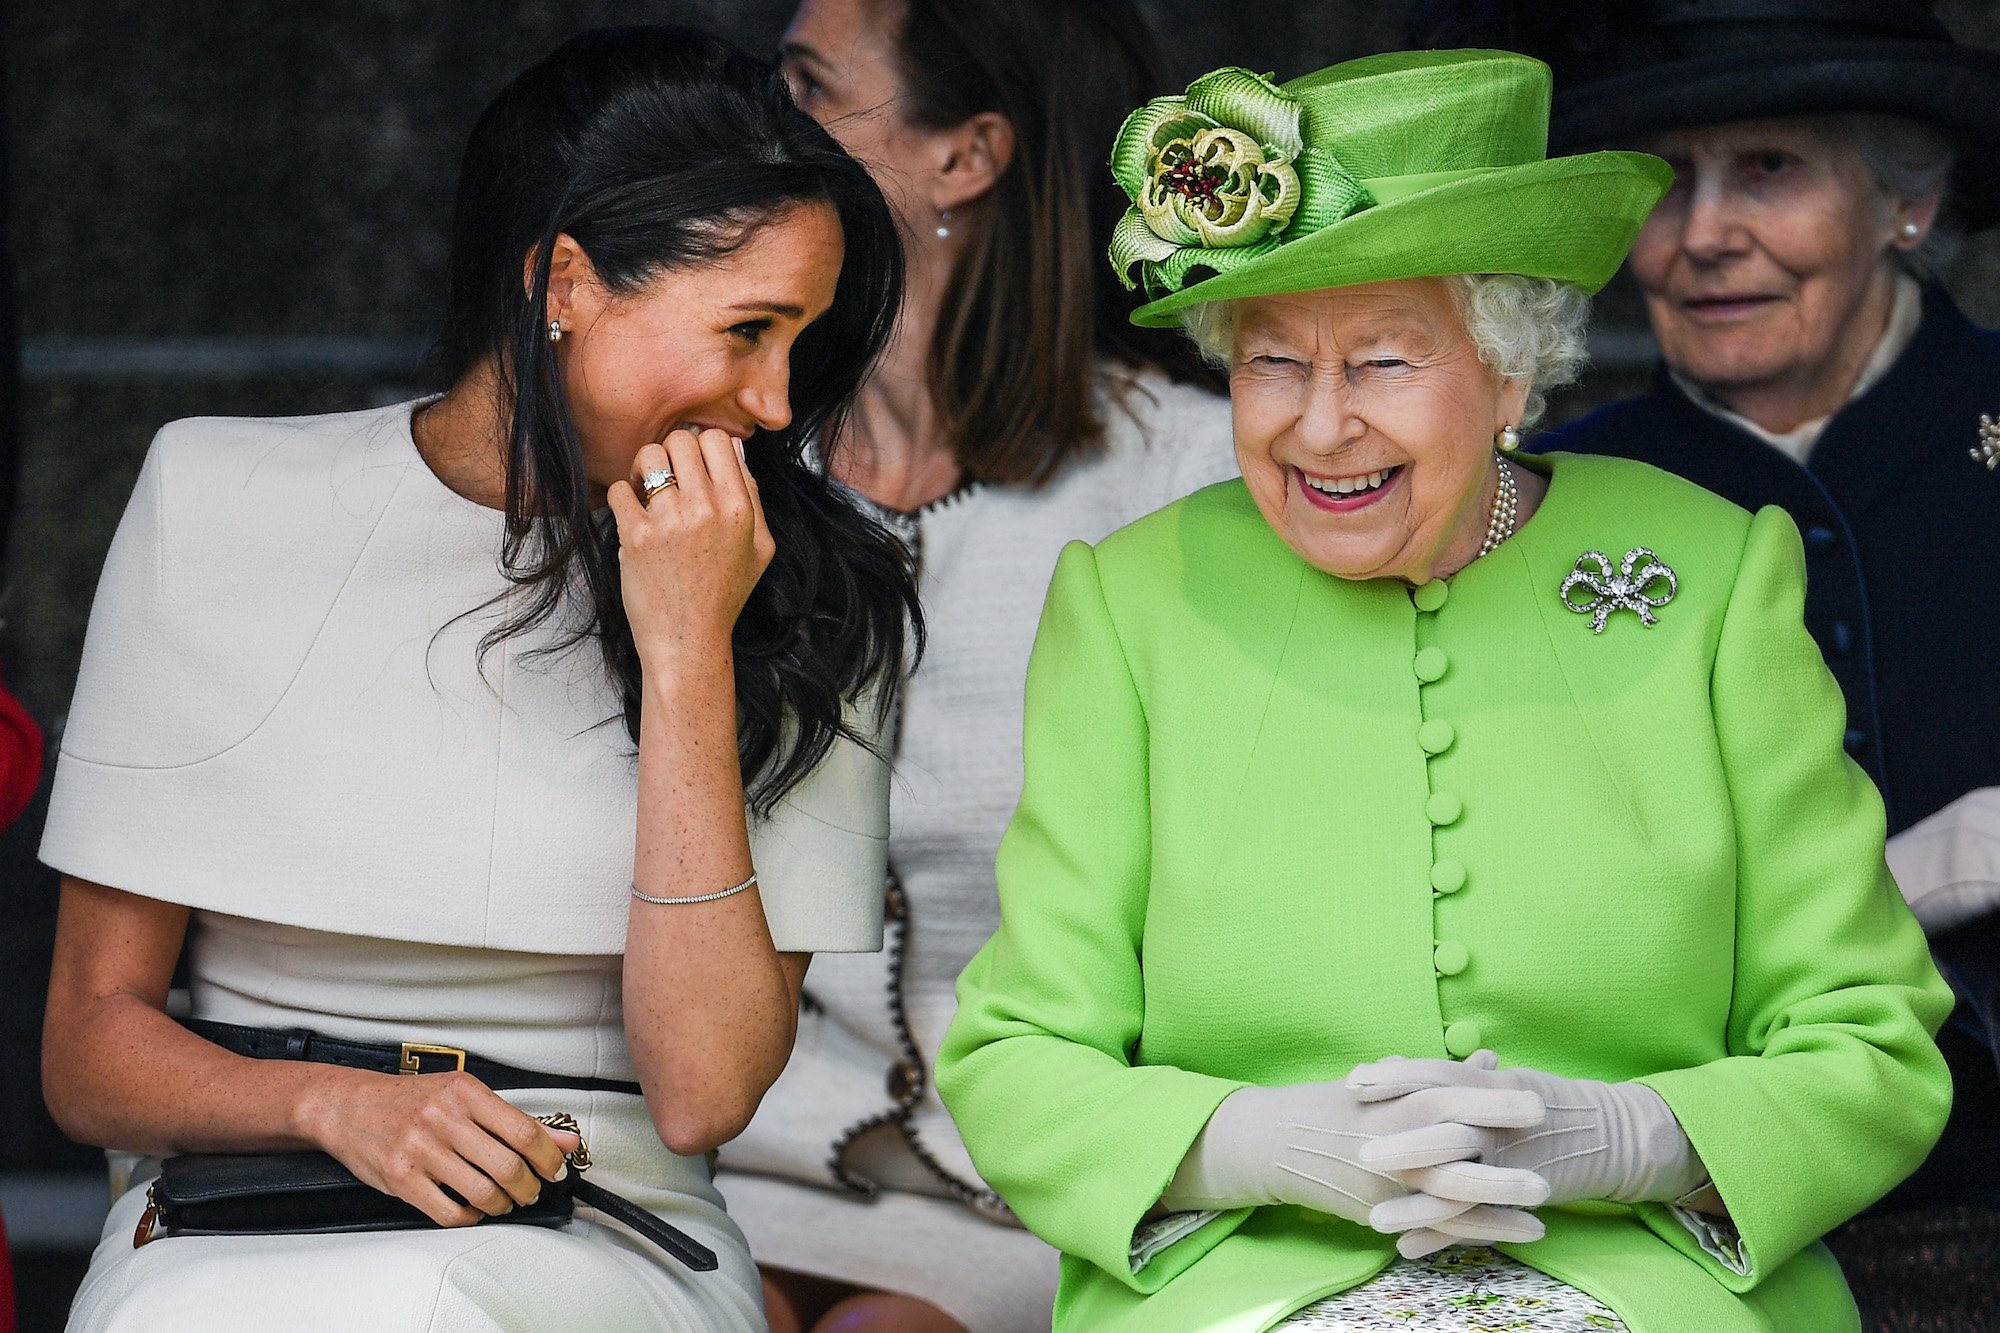 Does Queen Elizabeth approve of Meghan Markle? Pictured here Meghan and the monarch are laughing at a royal event.
